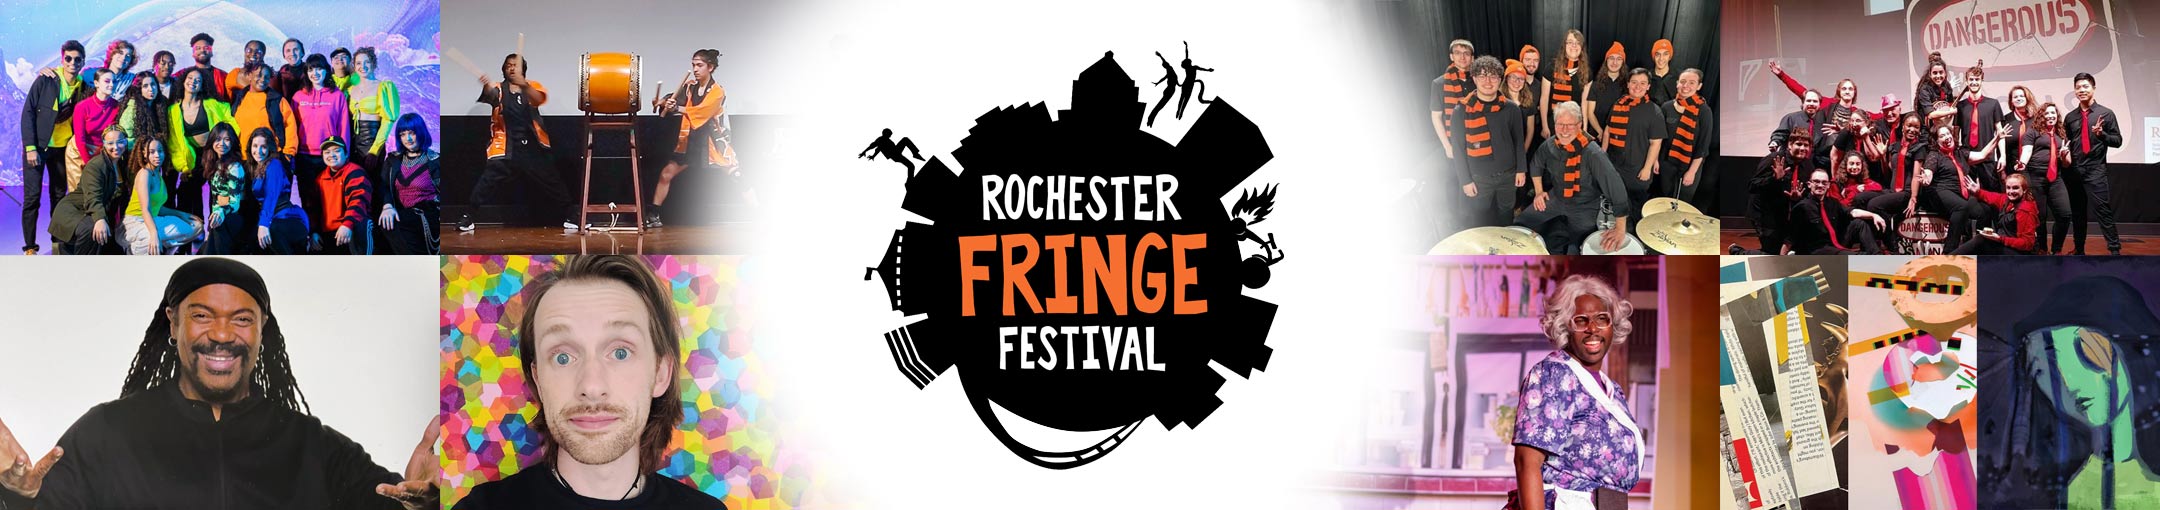 Rochester Fringe Festival logo with several performance photos to the left and right.